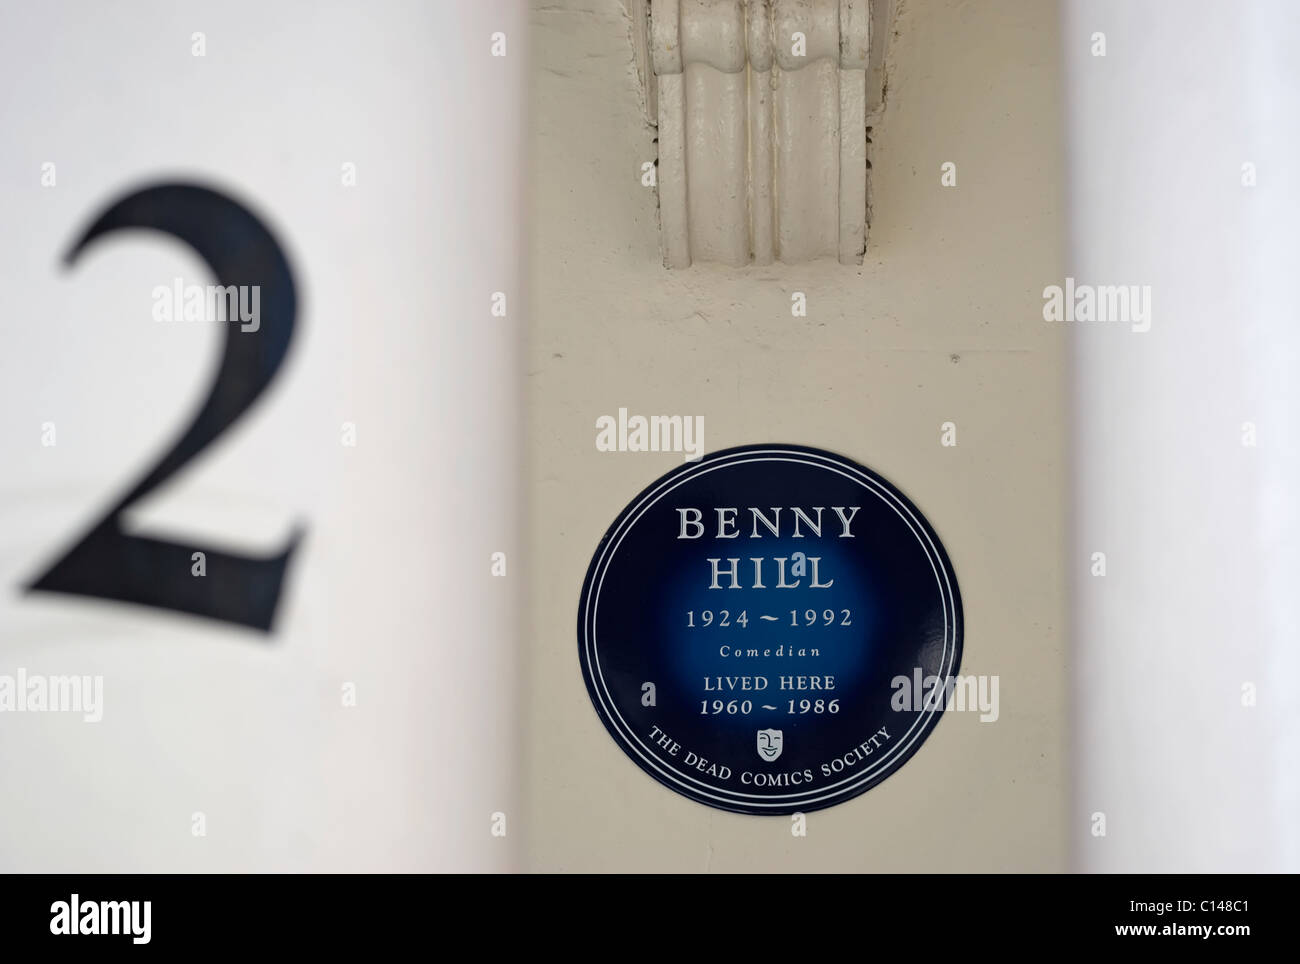 dead comics society blue plaque marking a home of comedian benny hill, in queen's gate, london, england Stock Photo